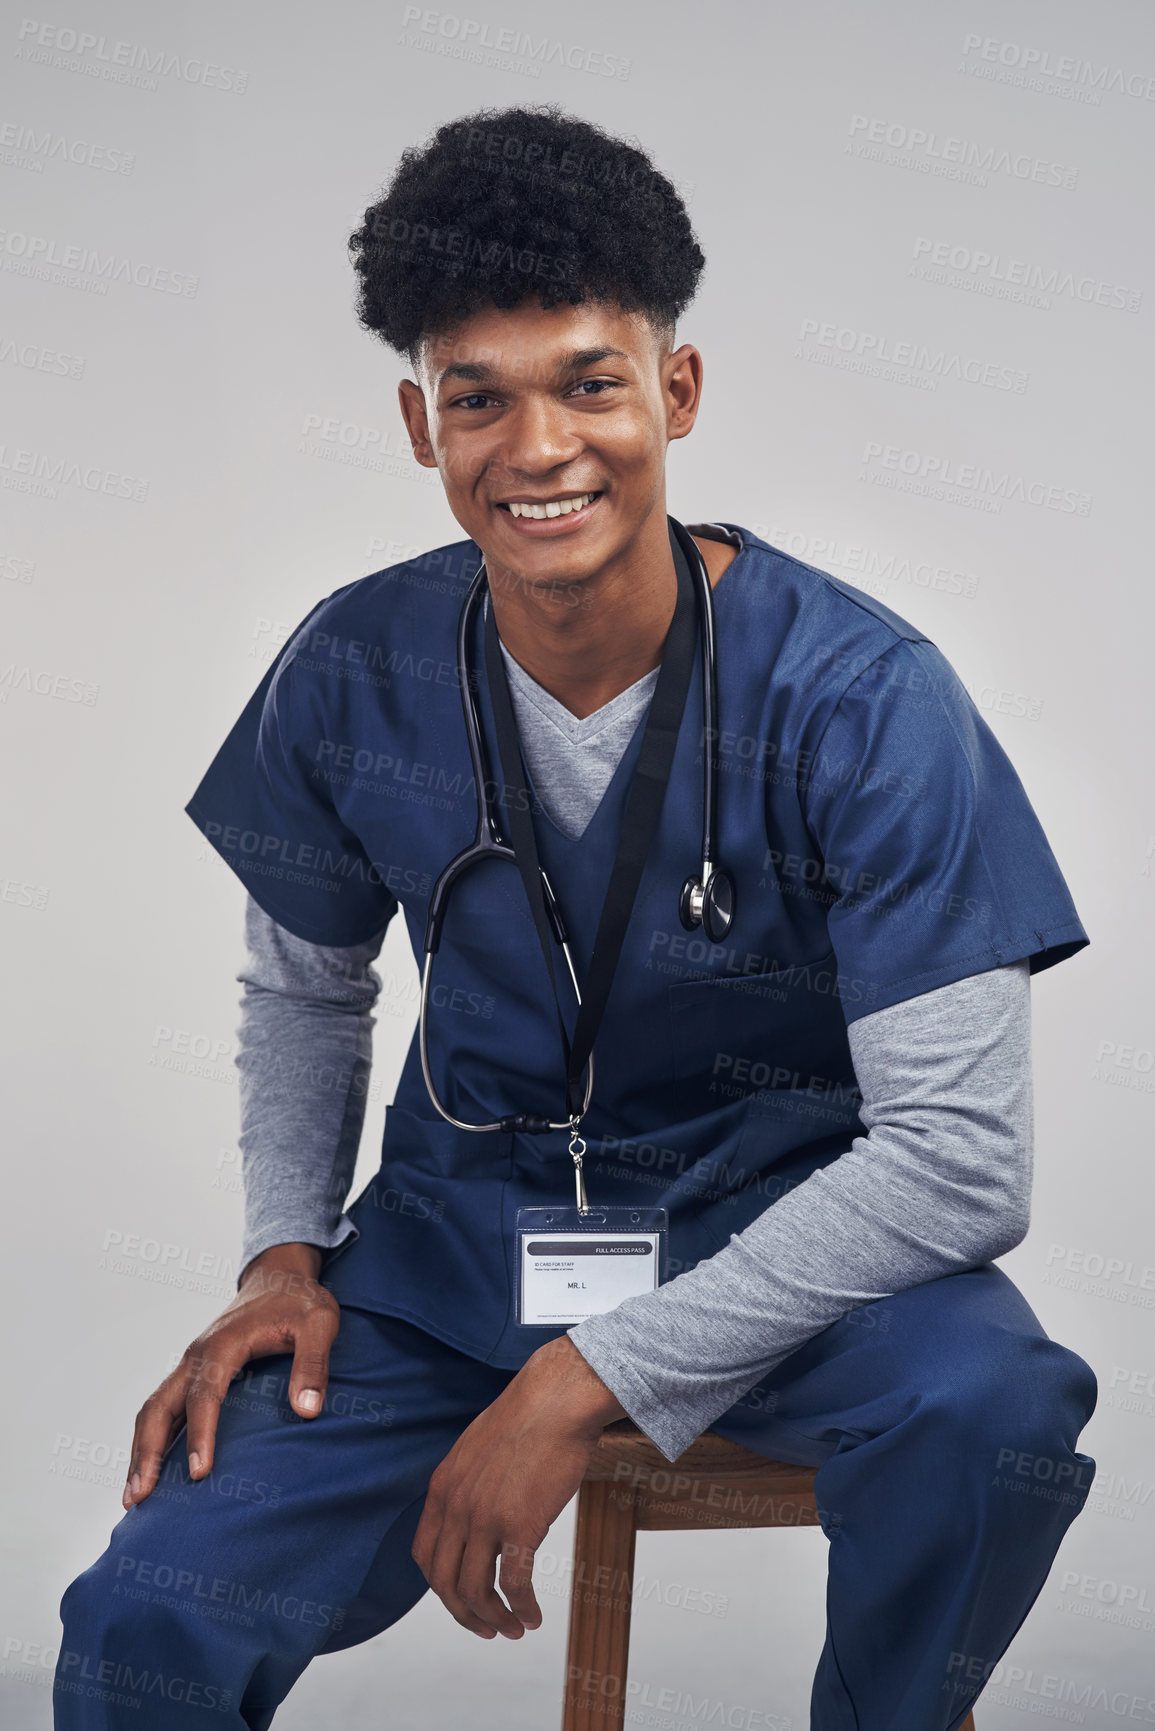 Buy stock photo Studio shot of a male nurse sitting on a chair against a grey background